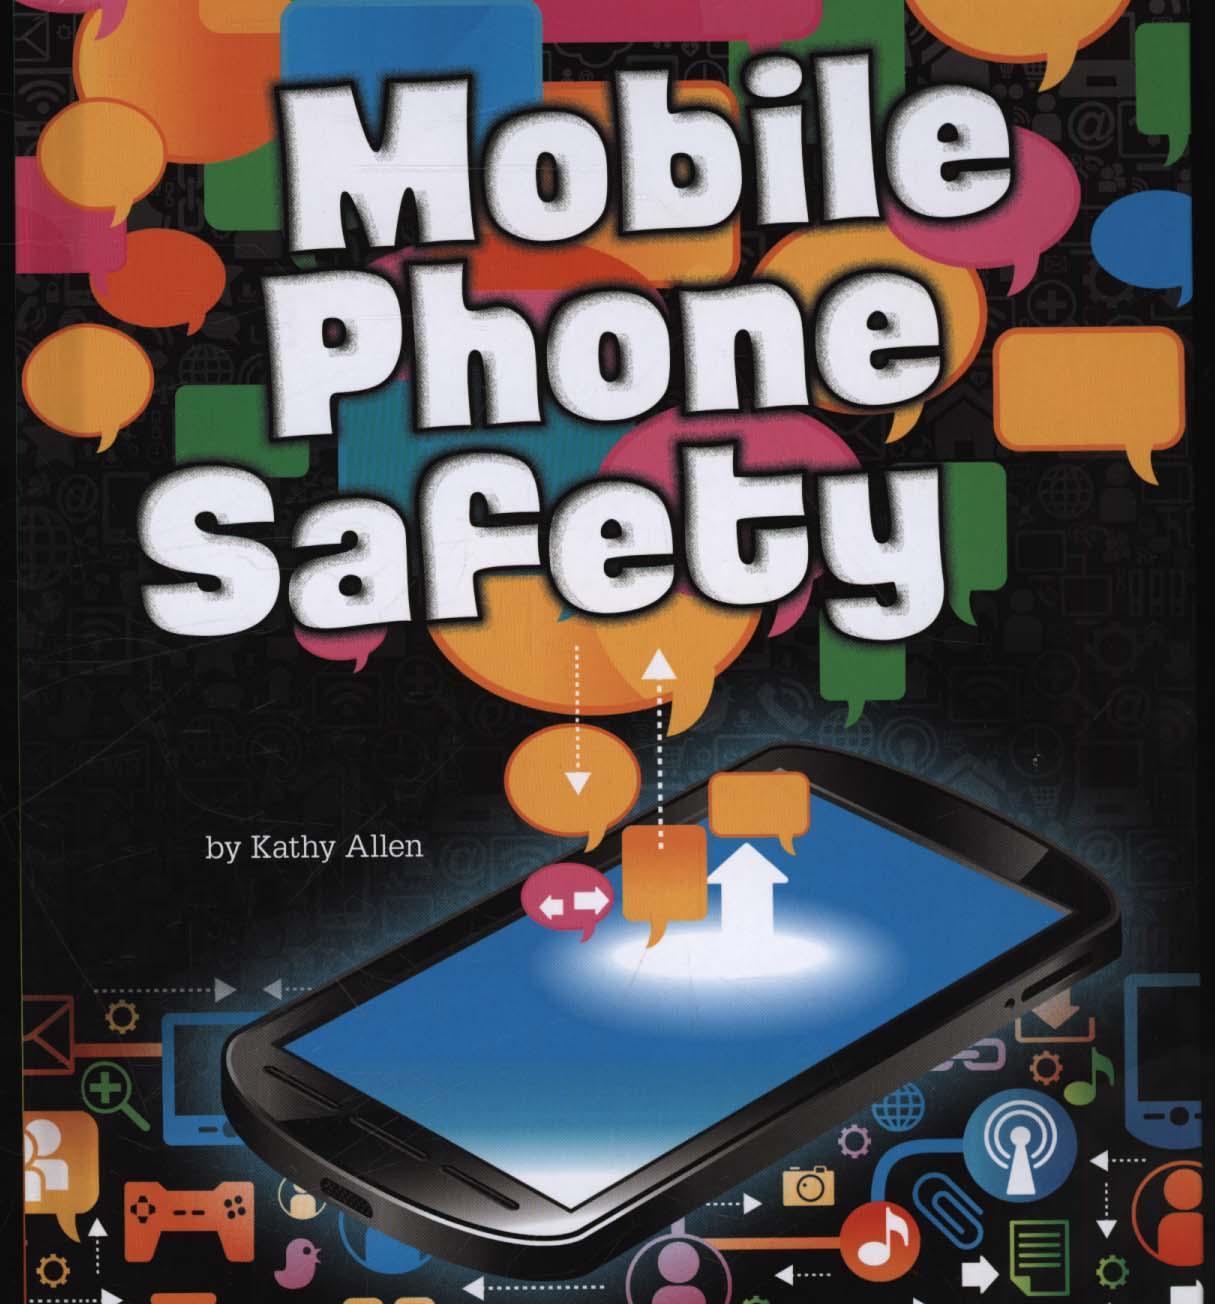 Mobile Phone Safety